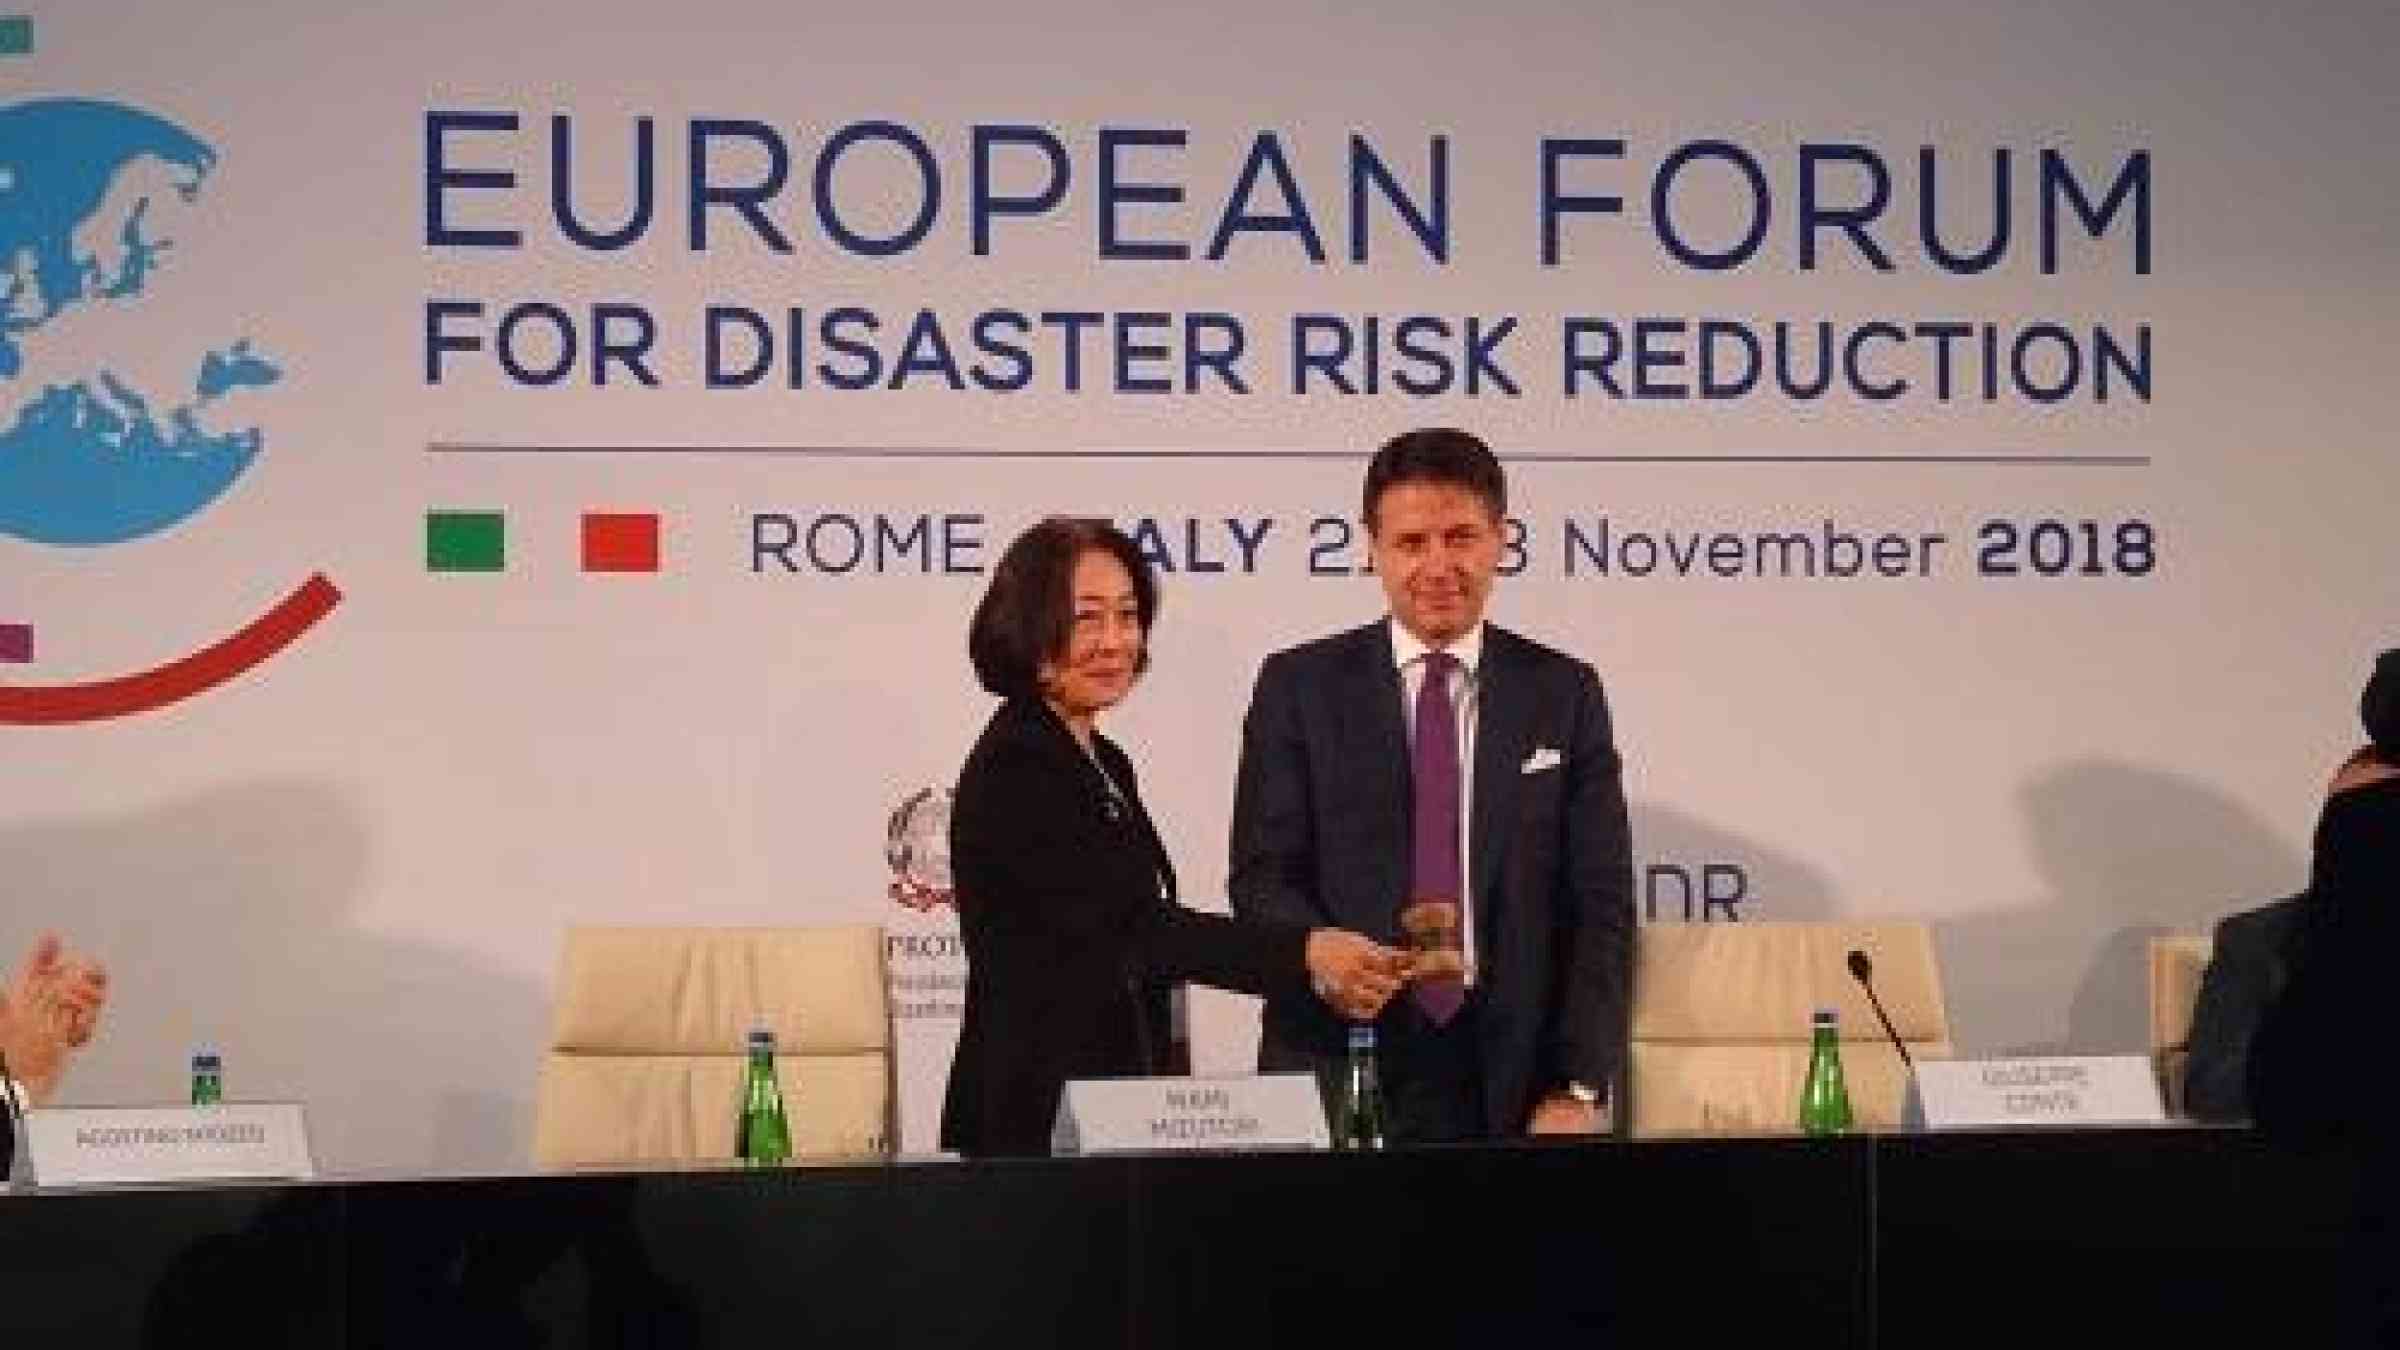 The head of UNISDR, Mami Mizutori, and the Prime Minister of Italy, Giuseppe Conte, declare open the European Forum for Disaster Risk Reduction